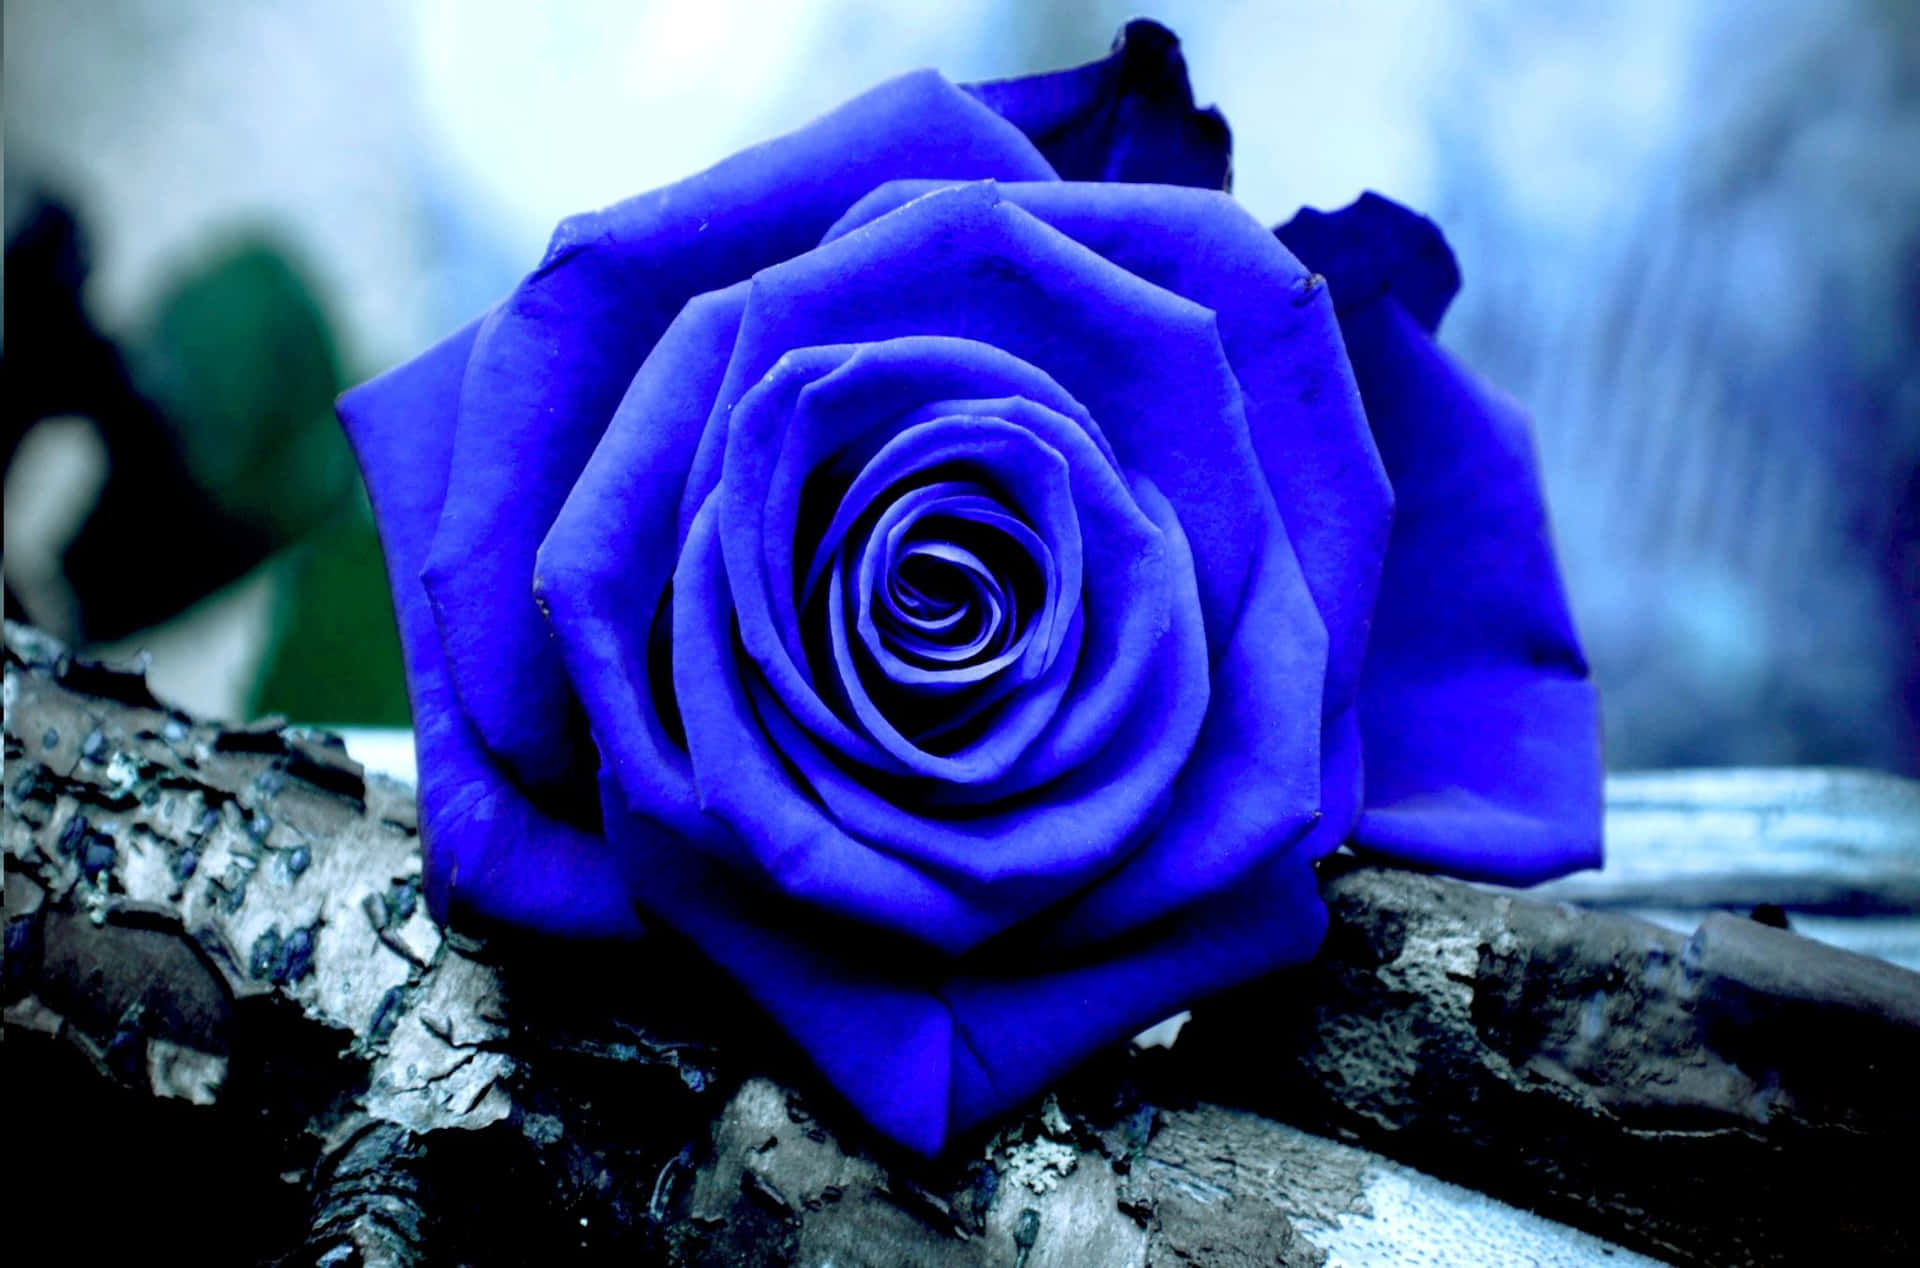 An Alluring Blue Rose Blooms In The Morning.